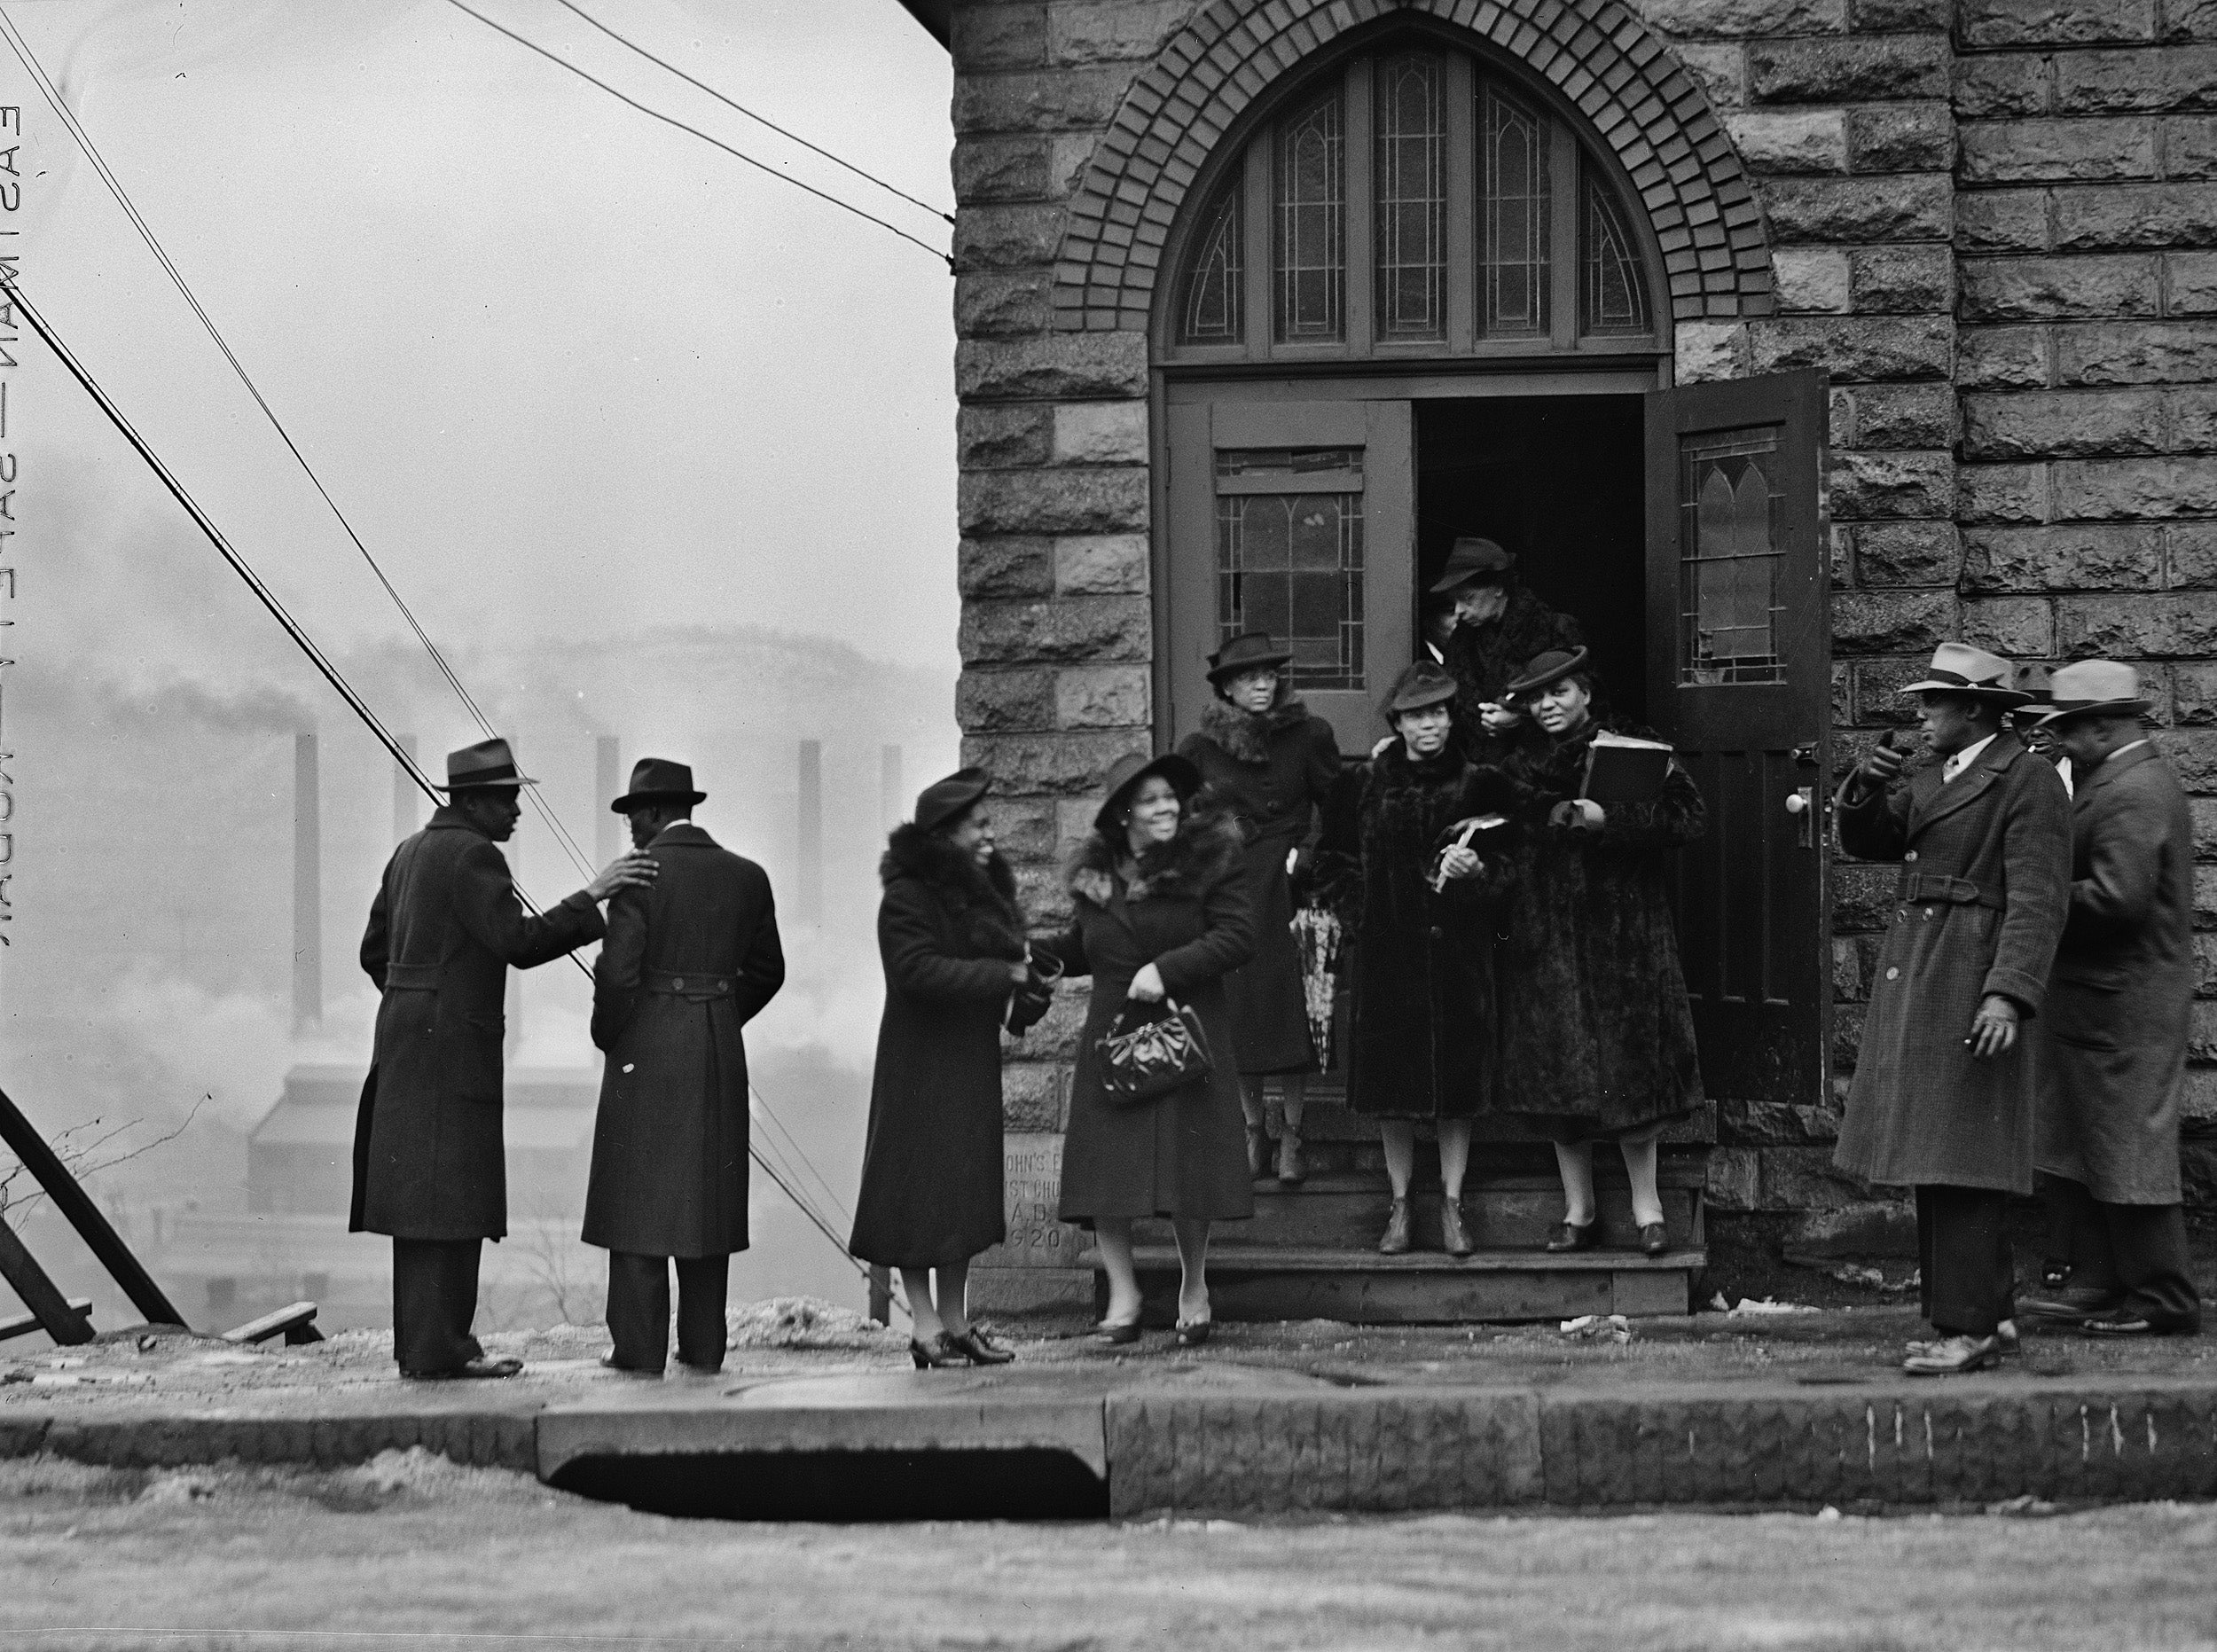 The history and importance of the Black Church